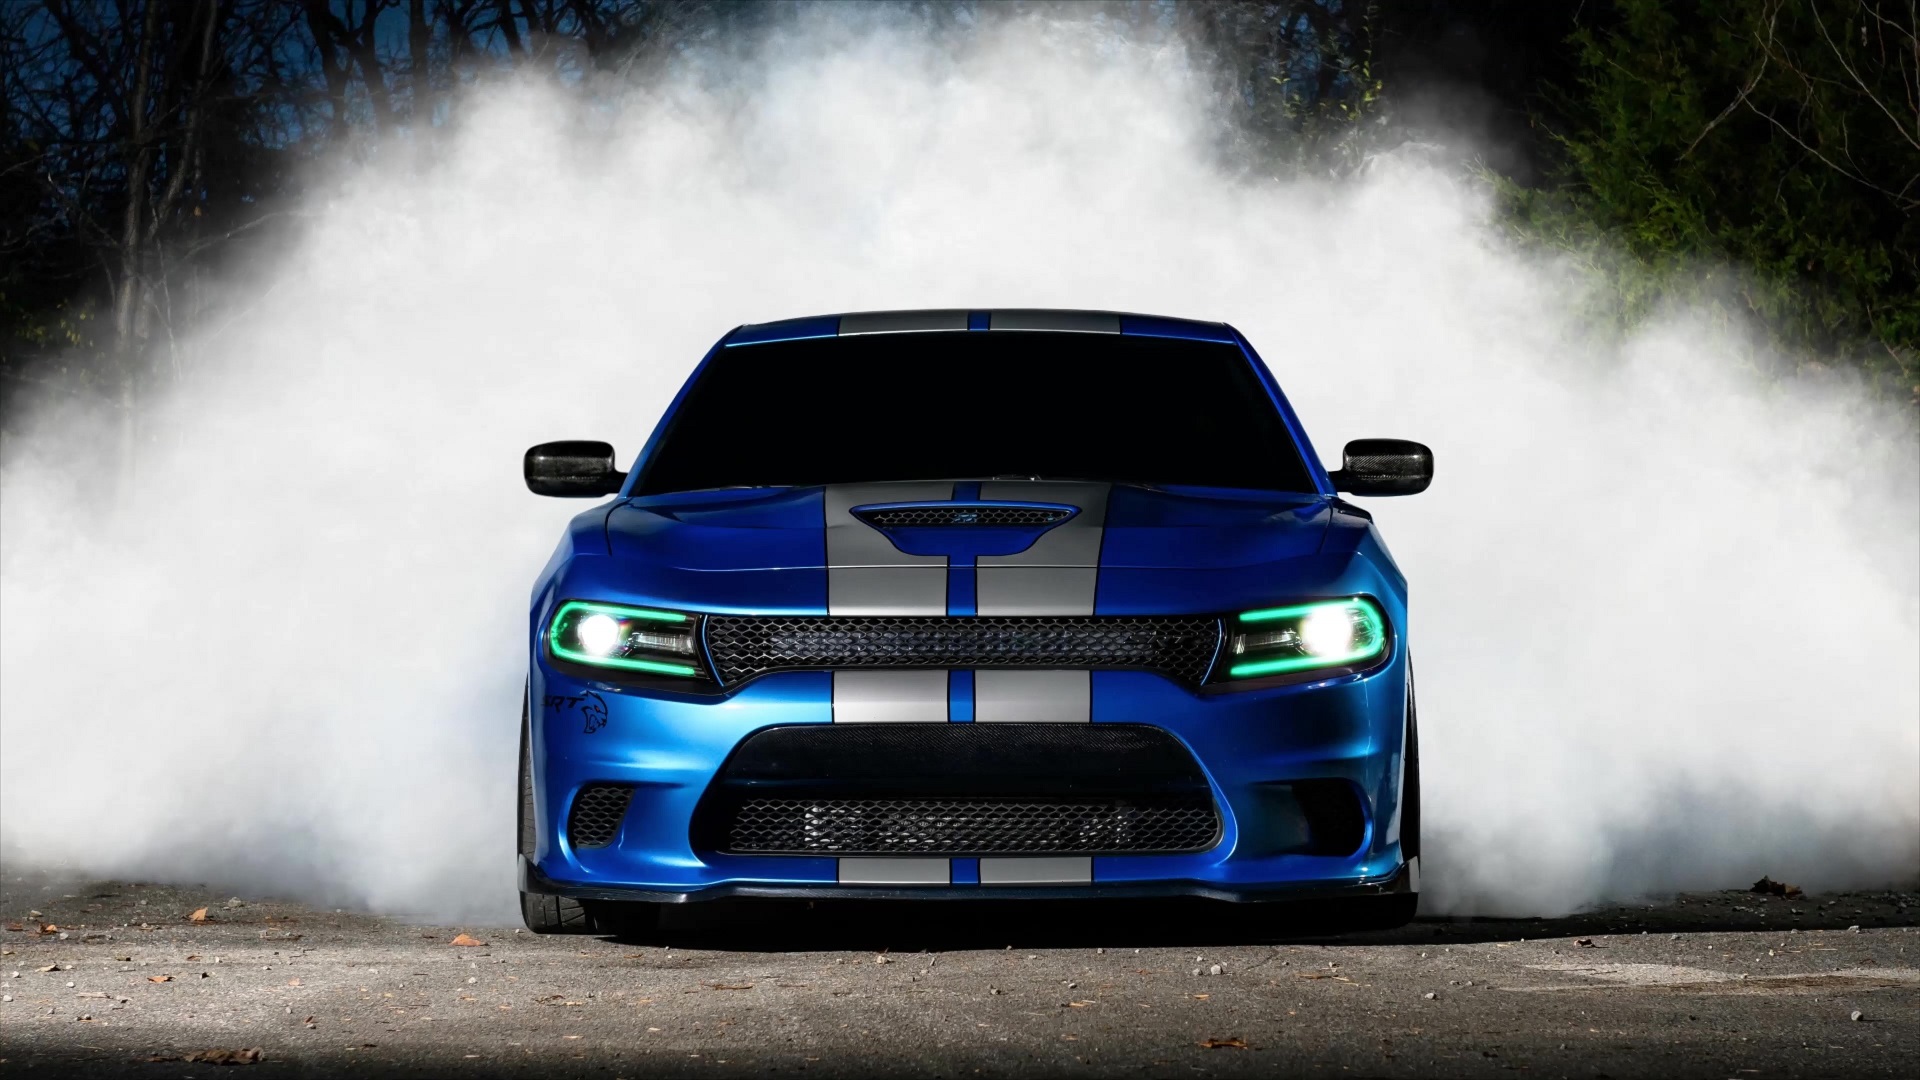 Download Dodge Charger Srt Hellcat wallpapers for mobile phone free  Dodge Charger Srt Hellcat HD pictures